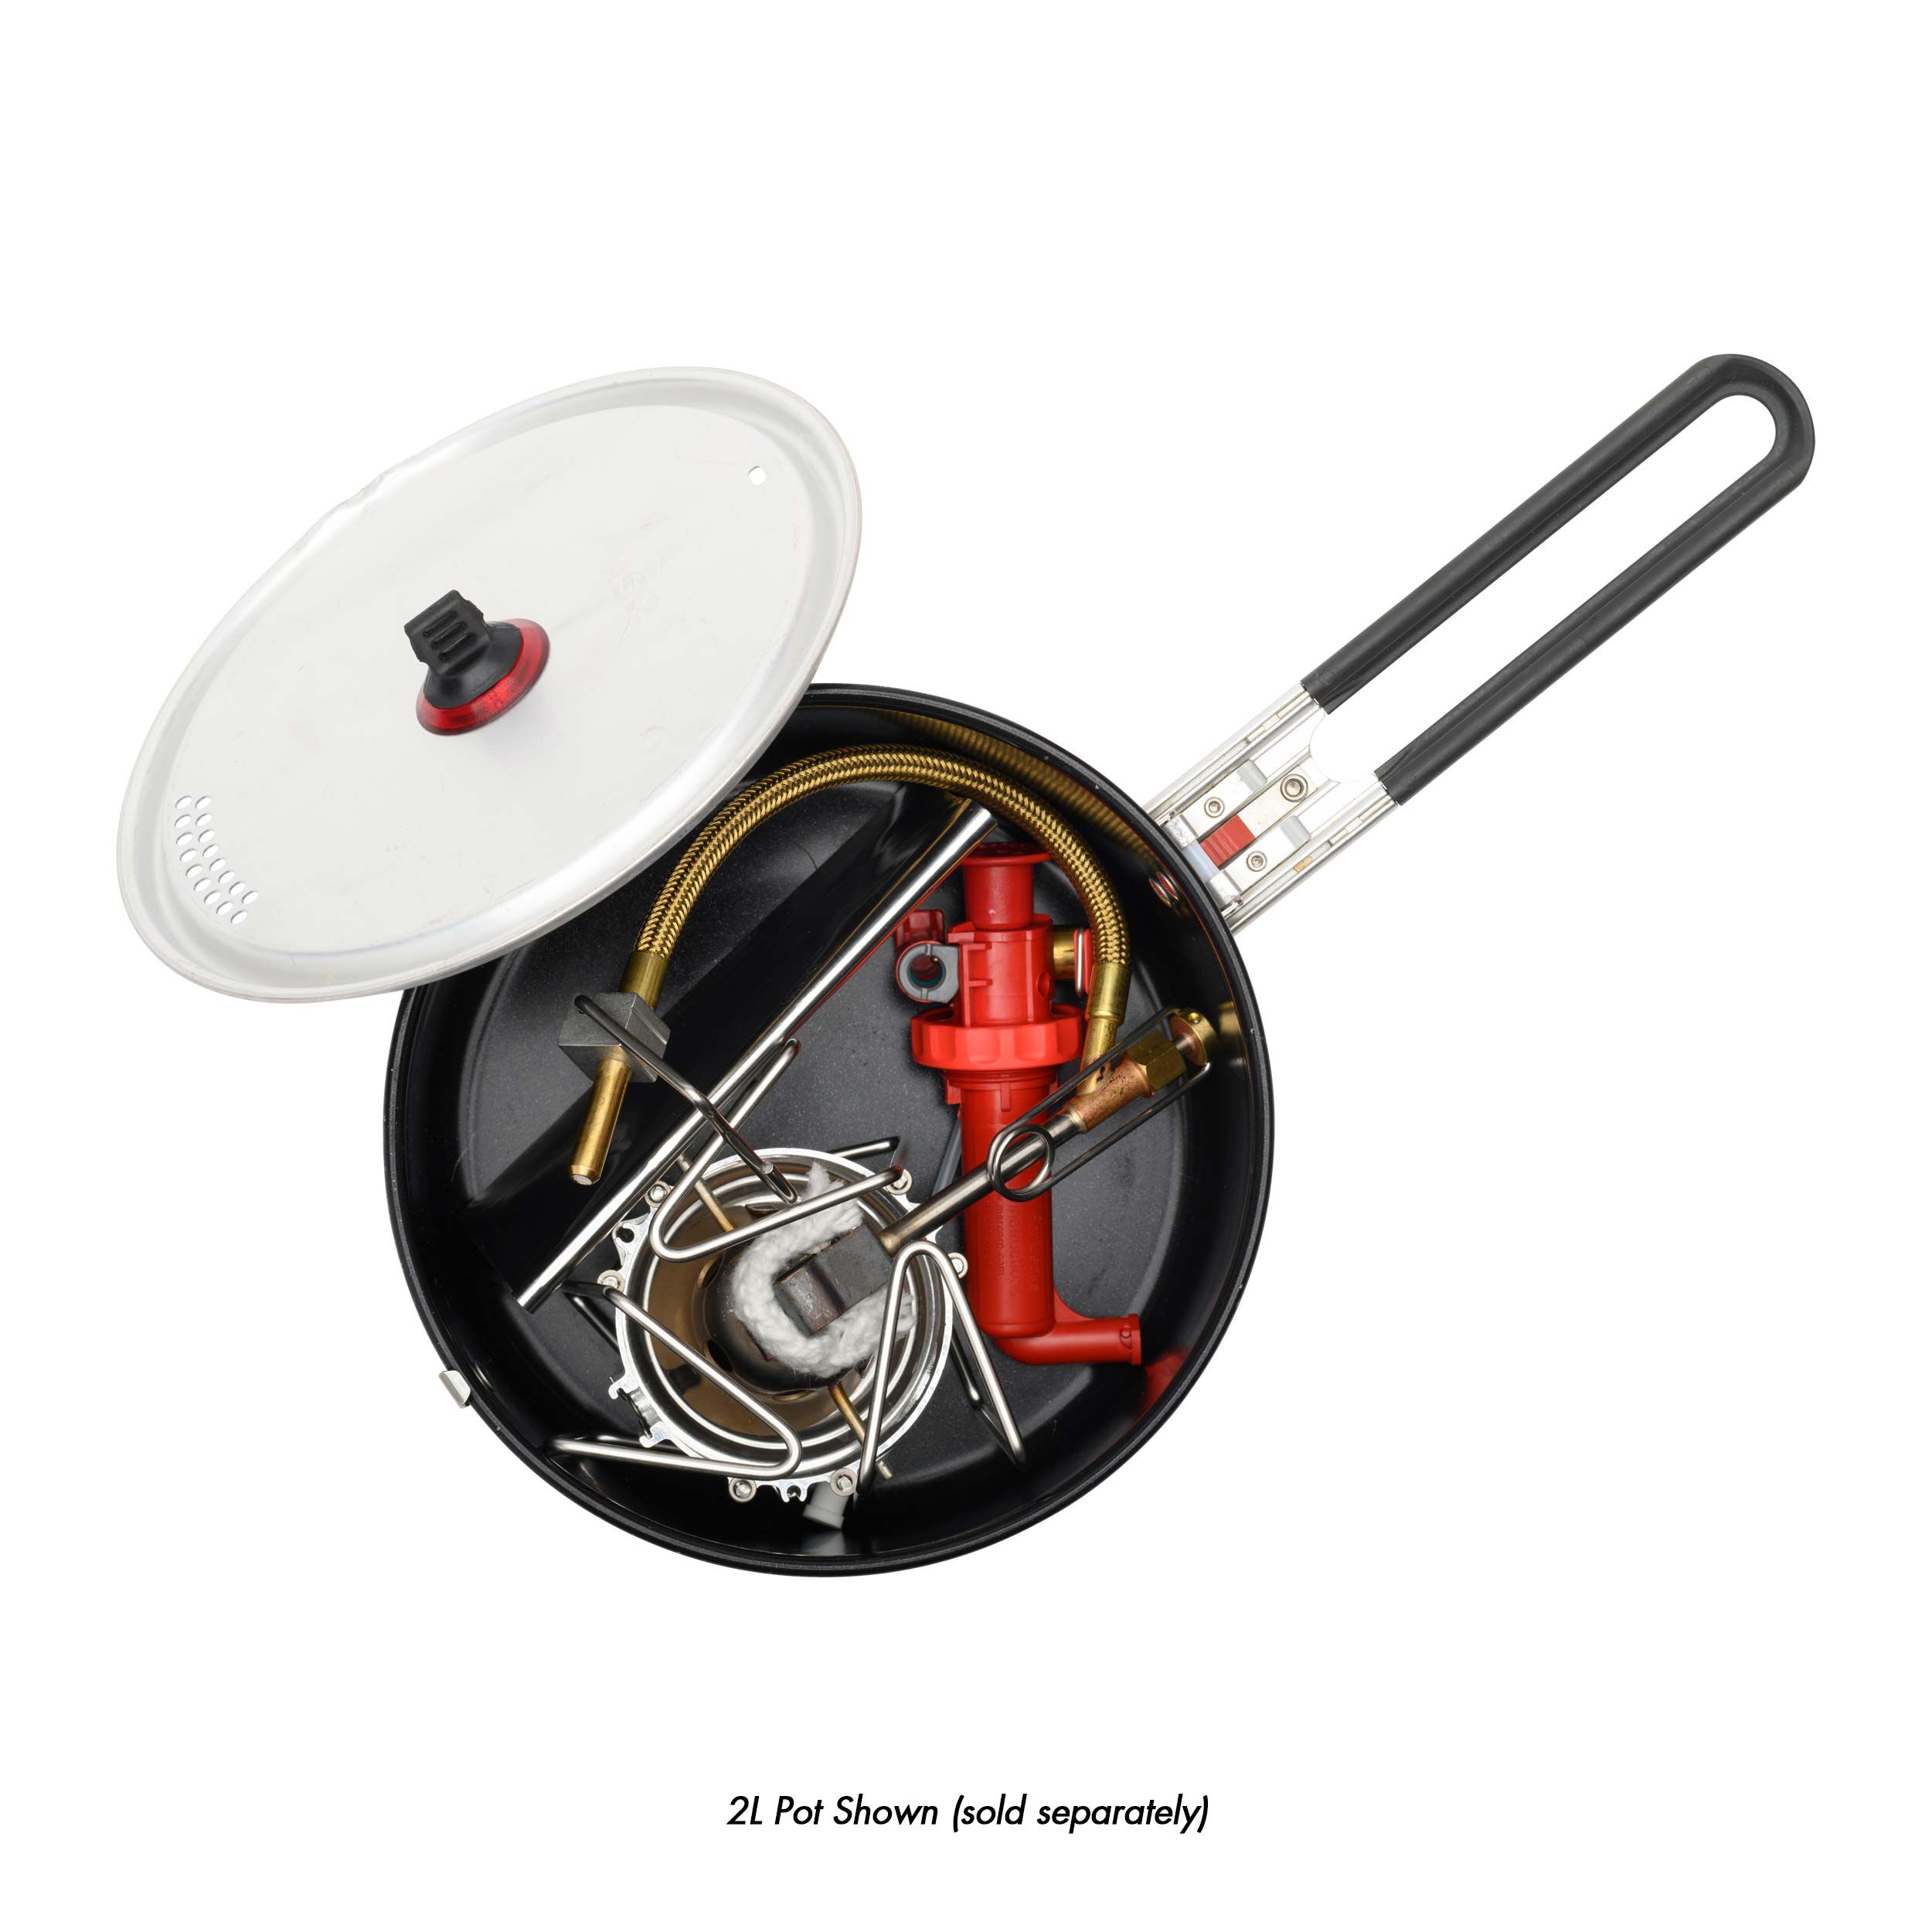 Dragonfly® Multi-Liquid Fuel Backpacking Stove | MSR®